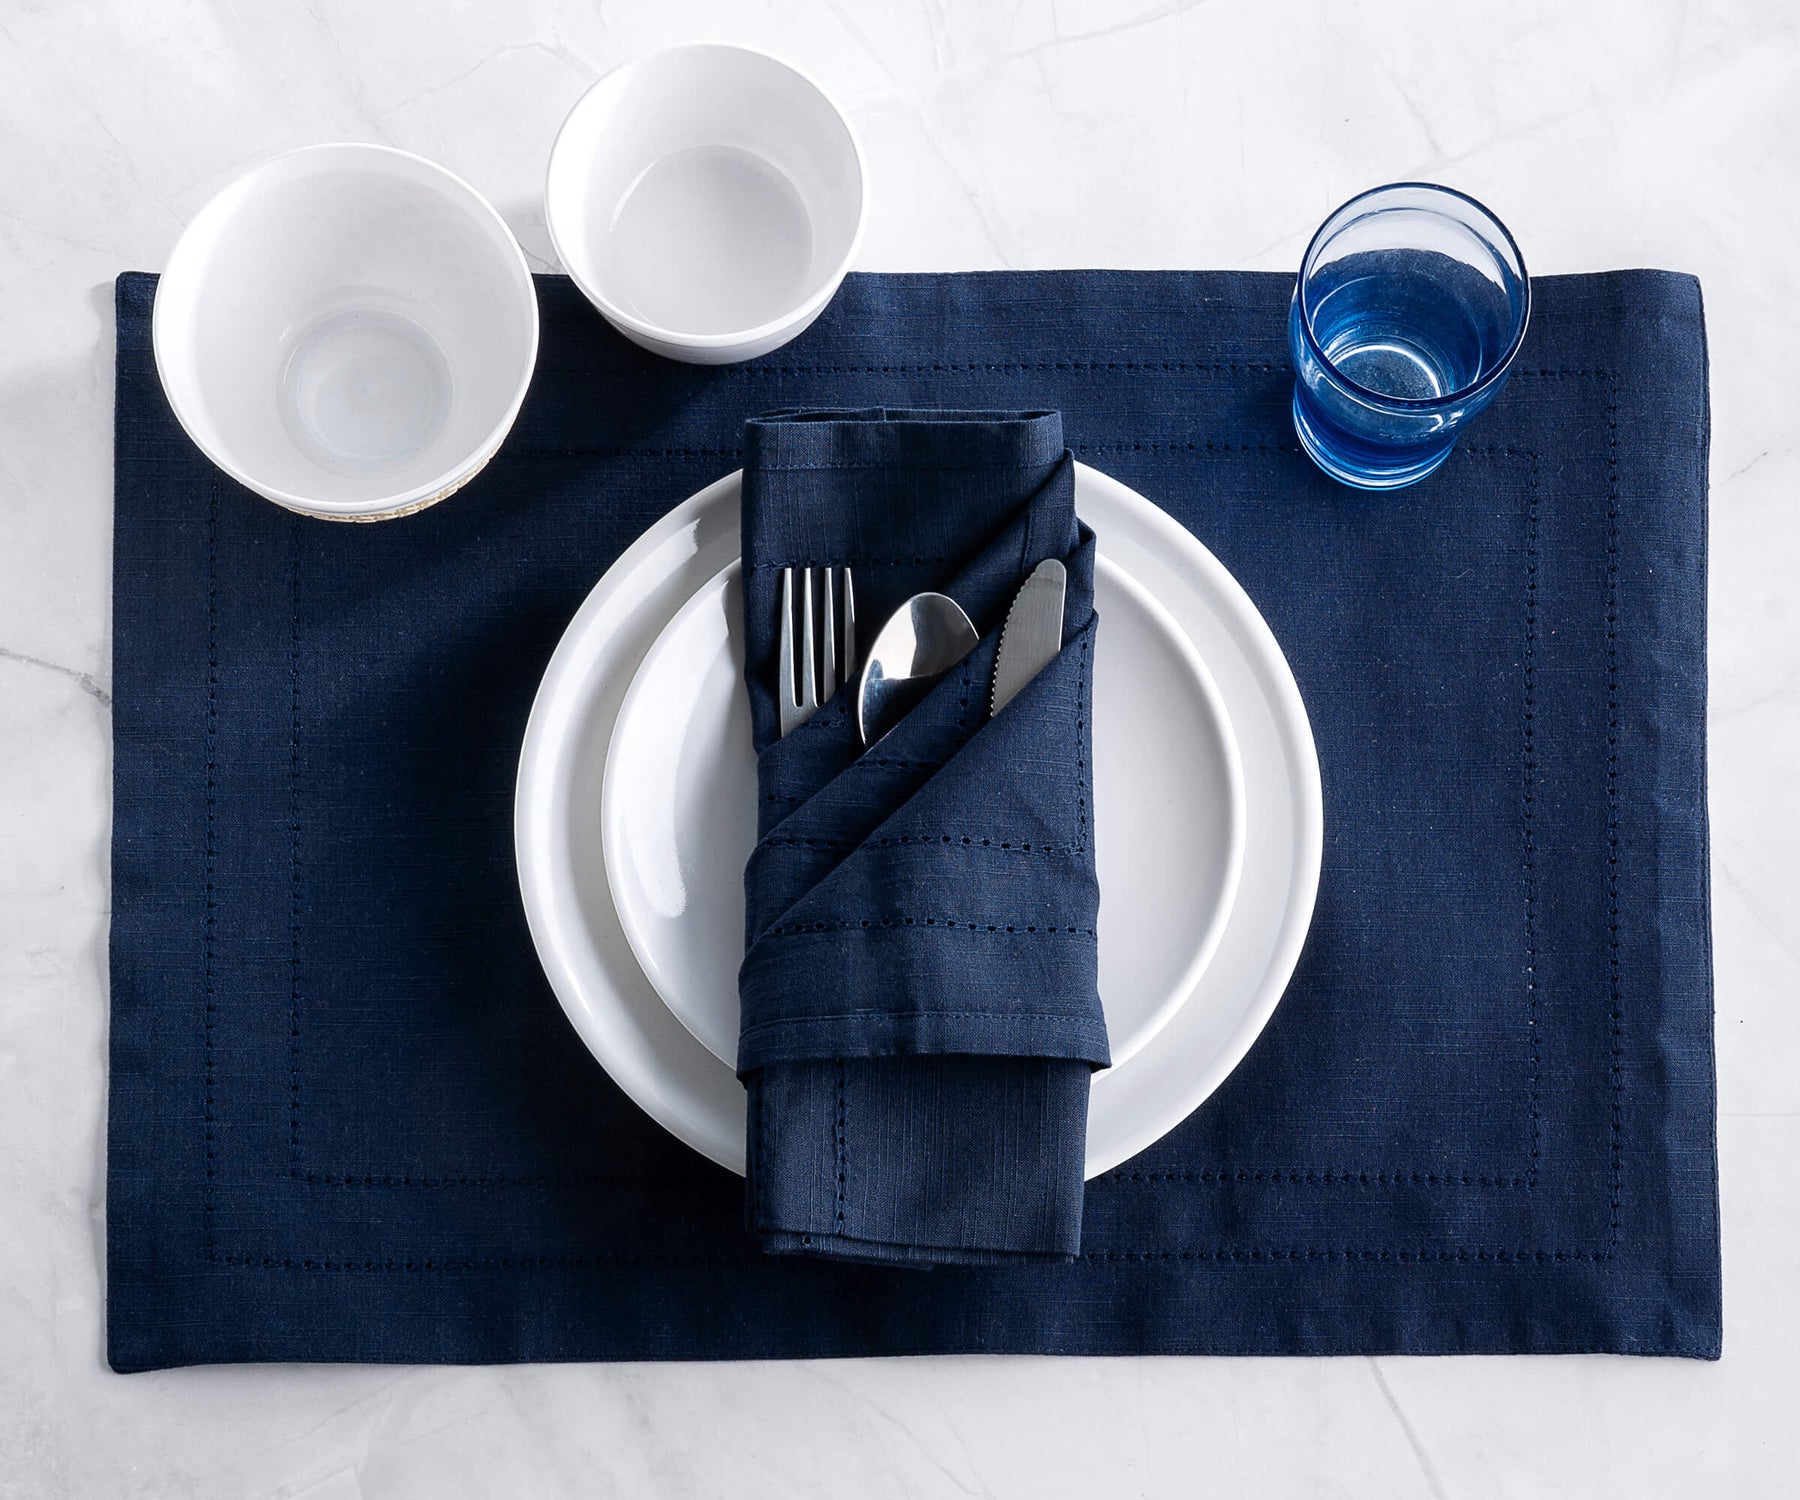 Folded rectangular placemats of size 13×18",hem stitched navy blue table placemats are placed on the plate..